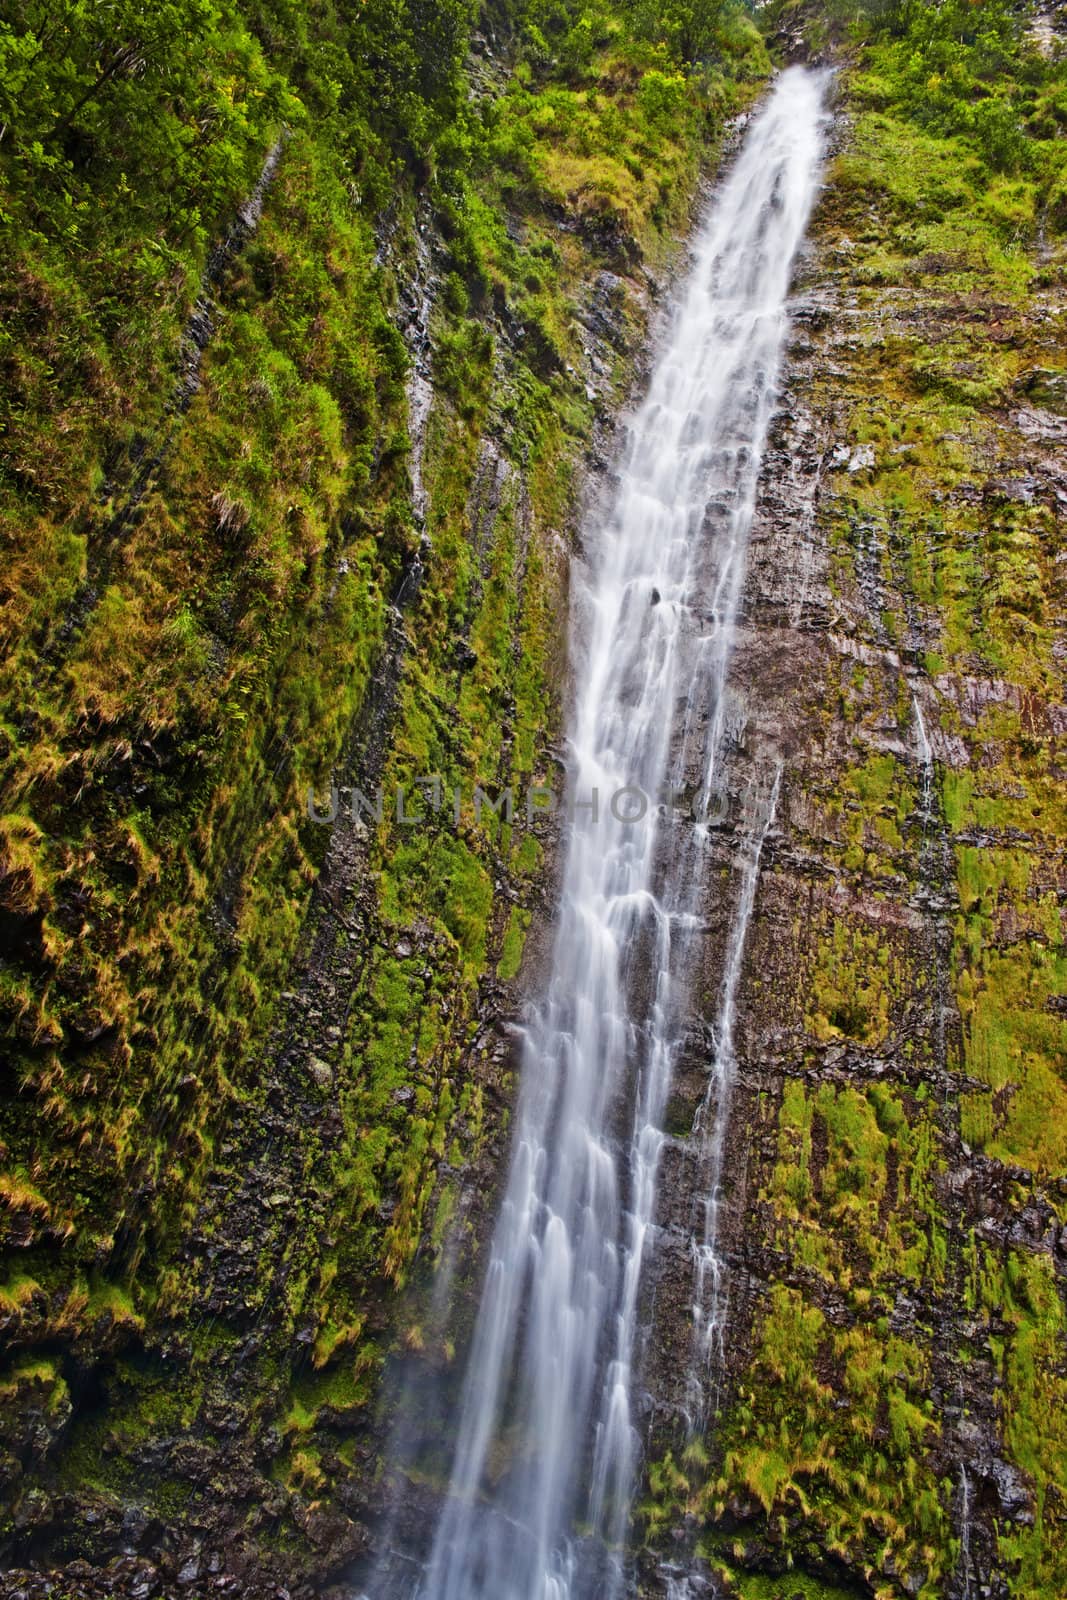 The Waimoku falls are at the end of the popular Waimoku Falls Trail on Maui Hawaii and about 120 meter tall.
